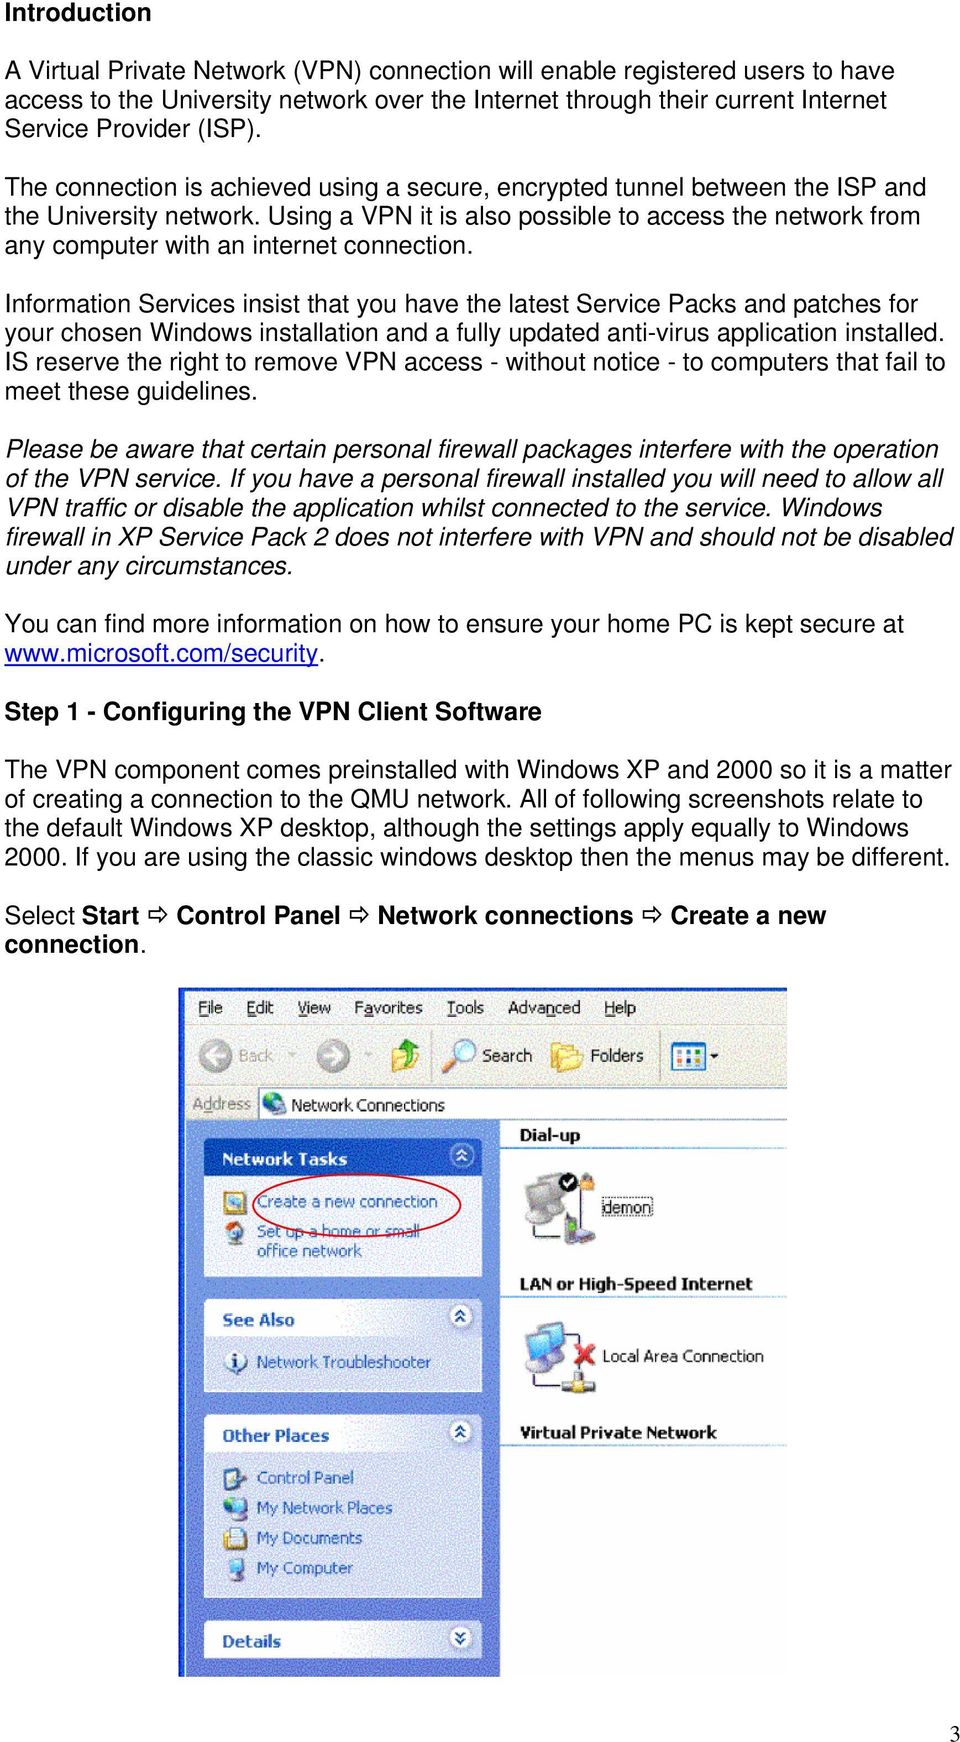 Using a VPN it is also possible to access the network from any computer with an internet connection.